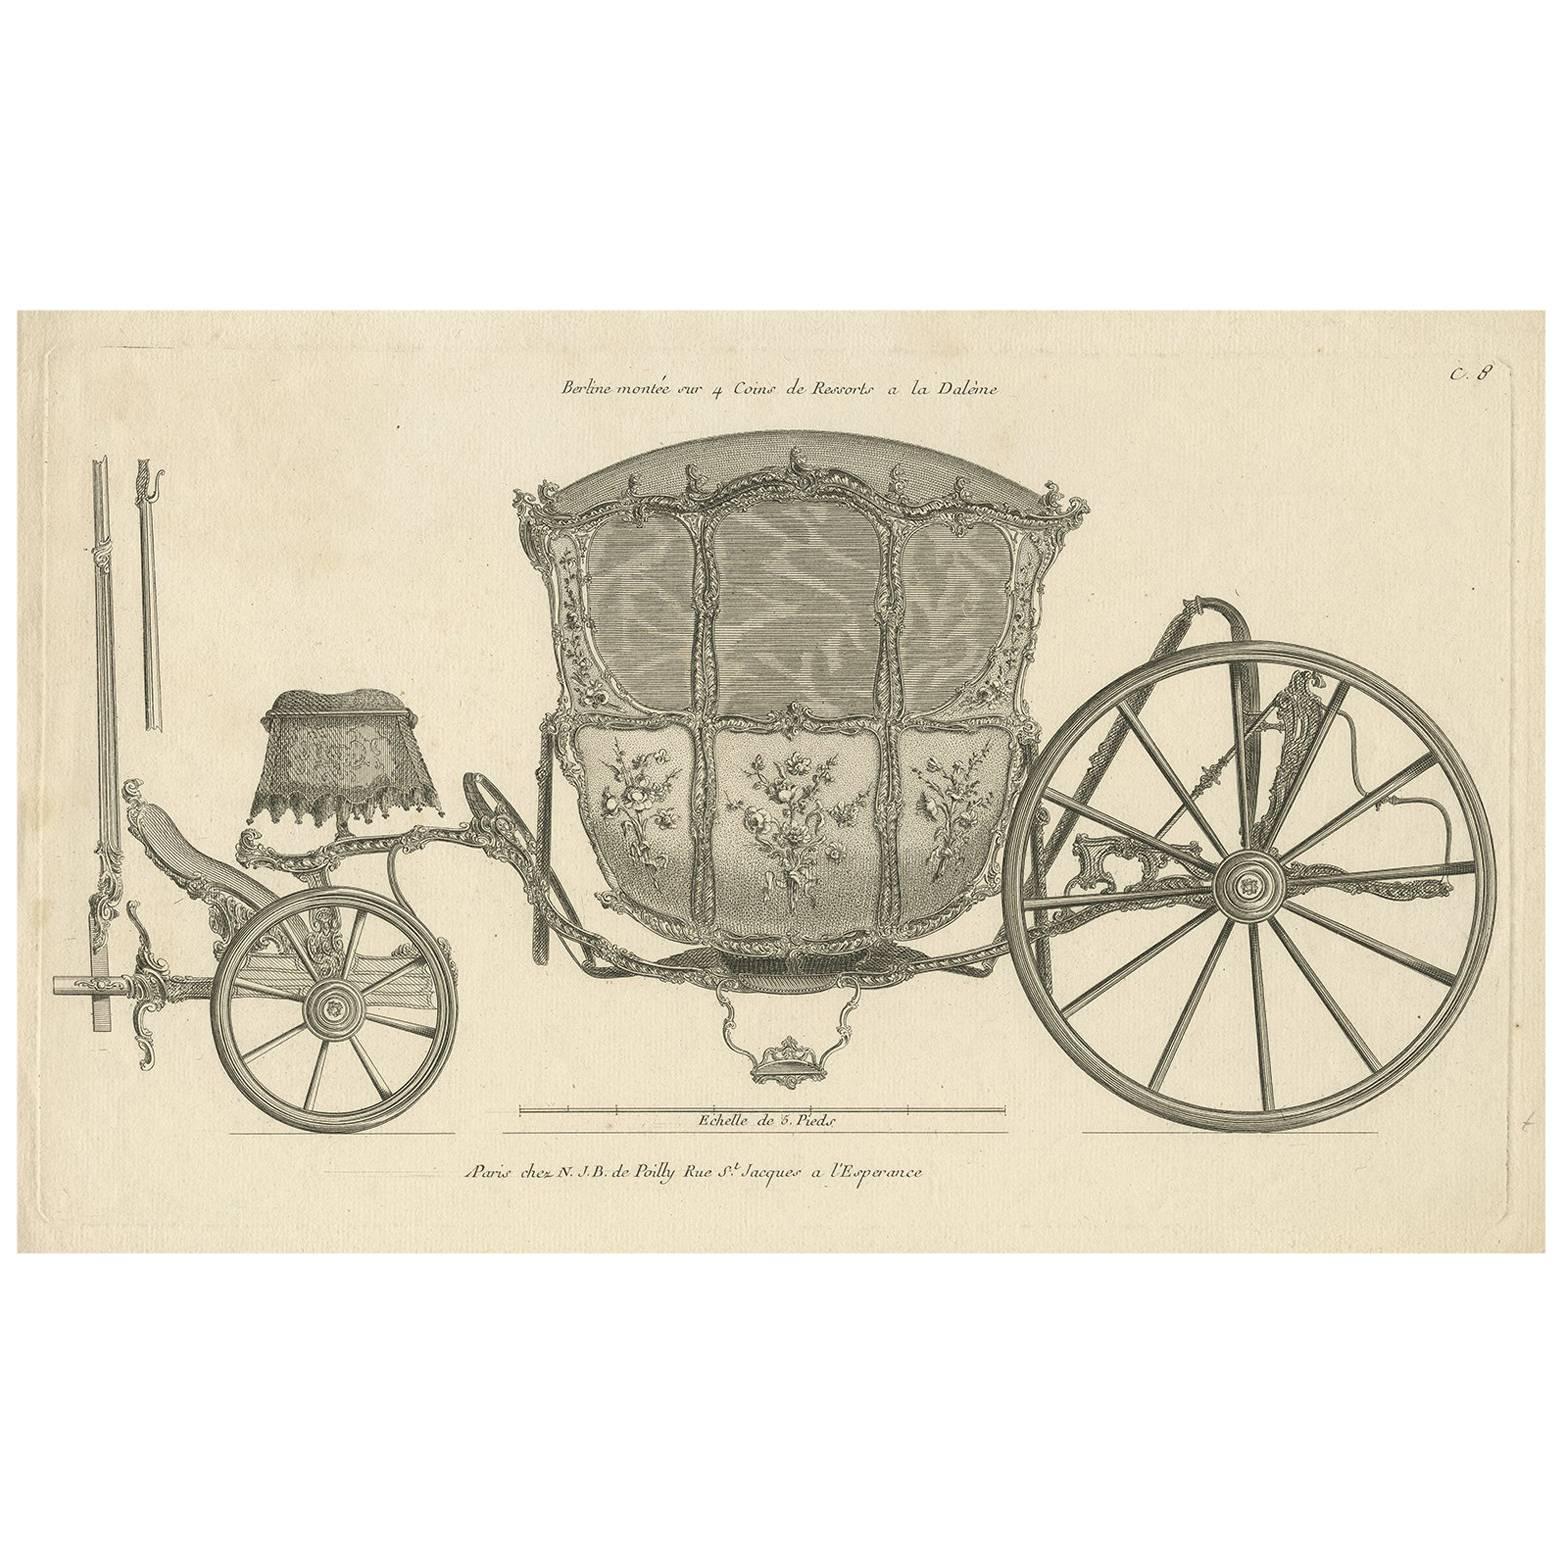 Antique Print of a Carriage by J.B. De Poilly, circa 1760